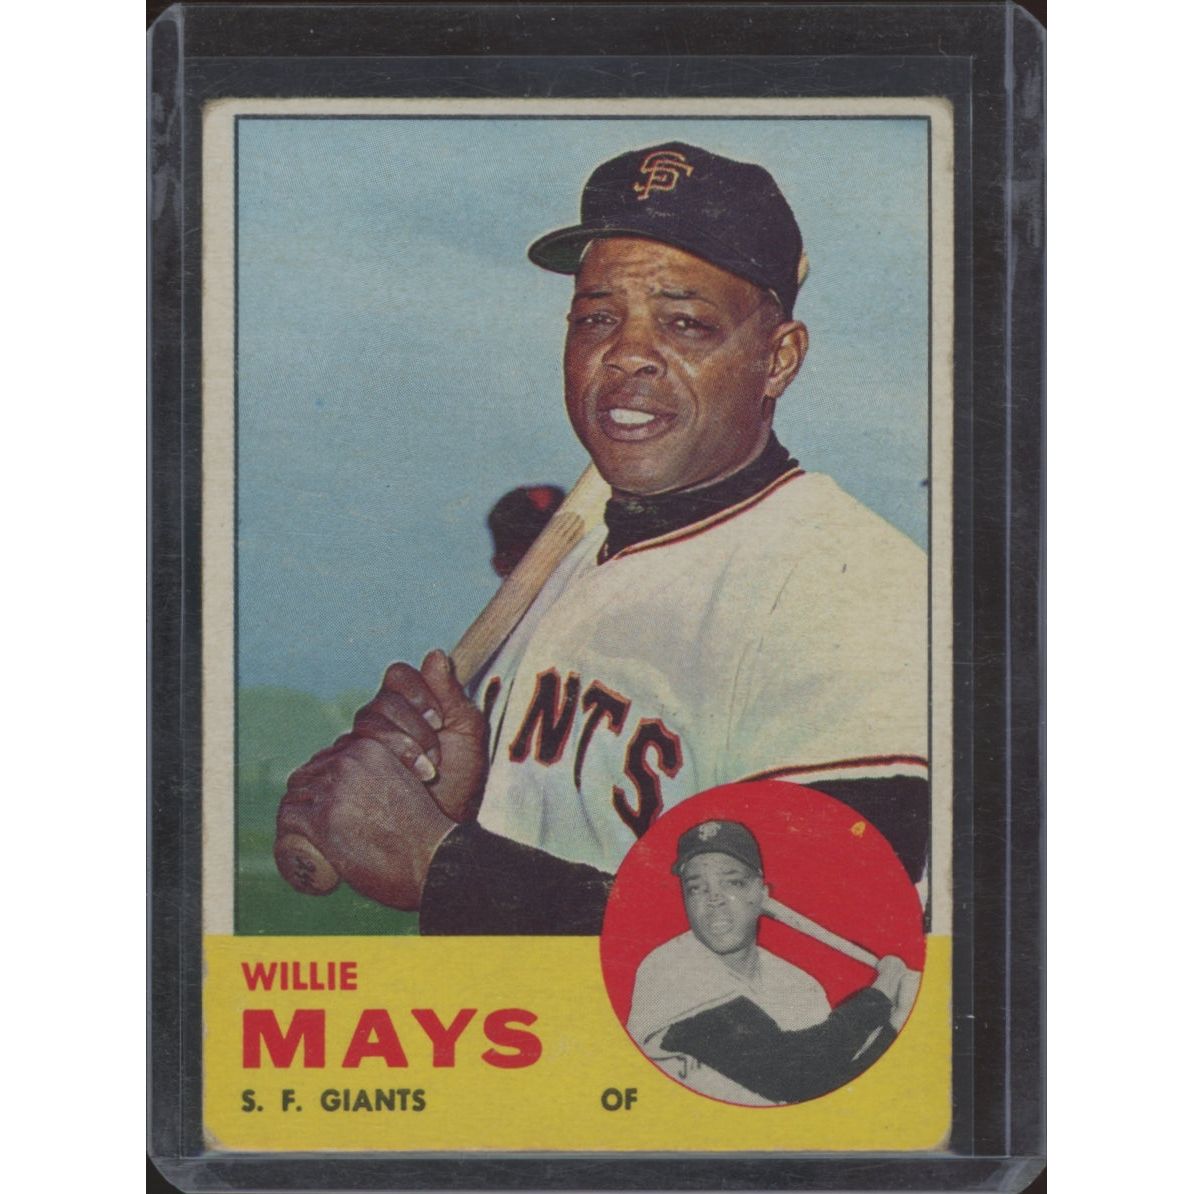 1963 Topps Willie Mays #300